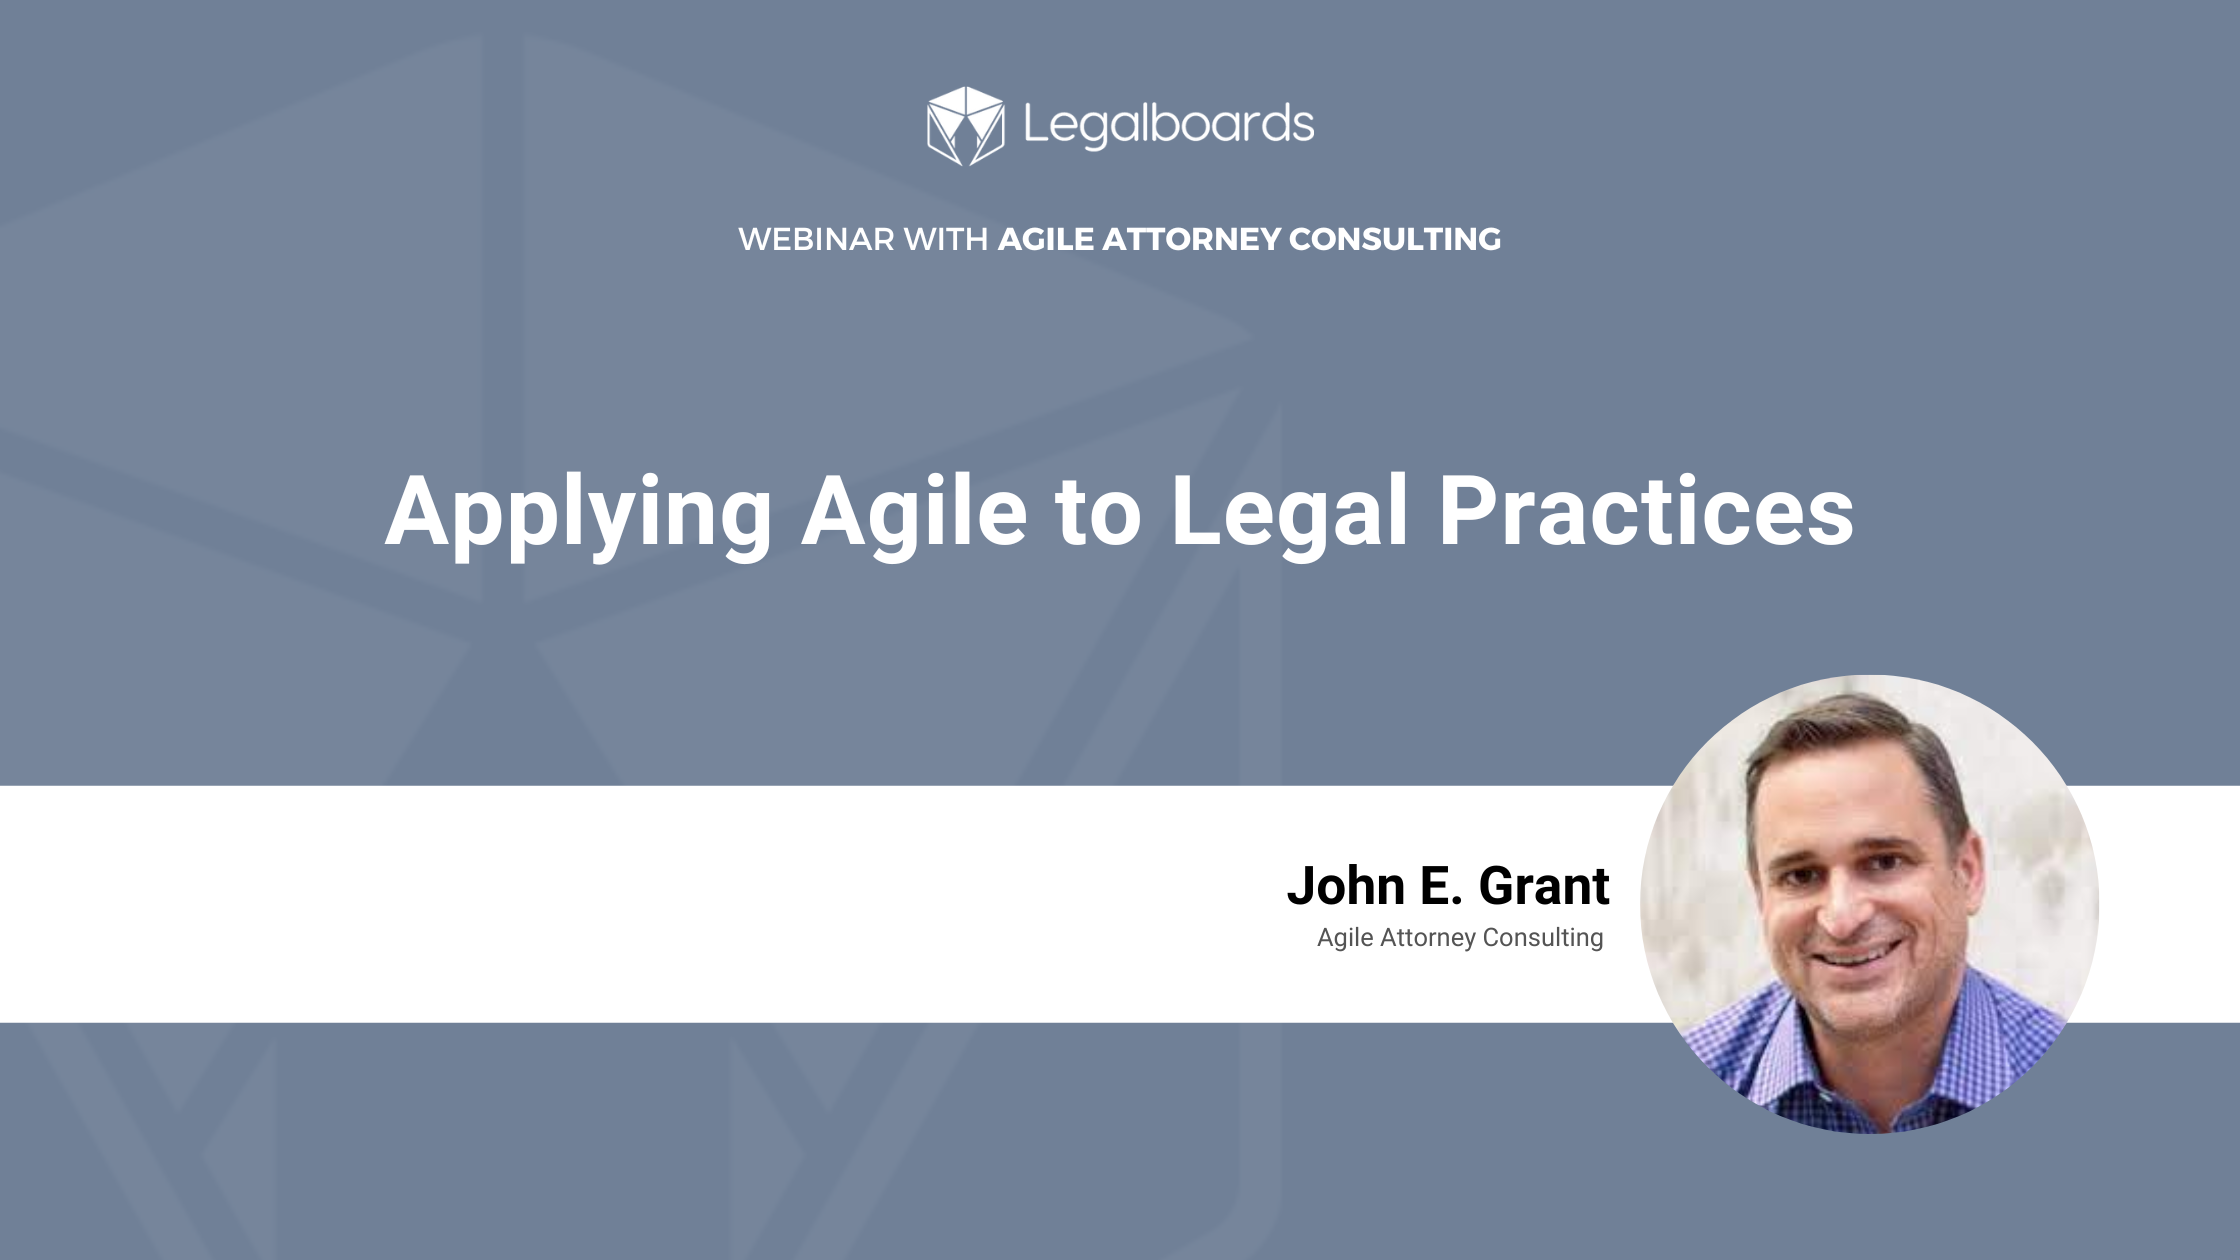 Applying Agile to Legal Practices Webinar with John Grant (pictured)